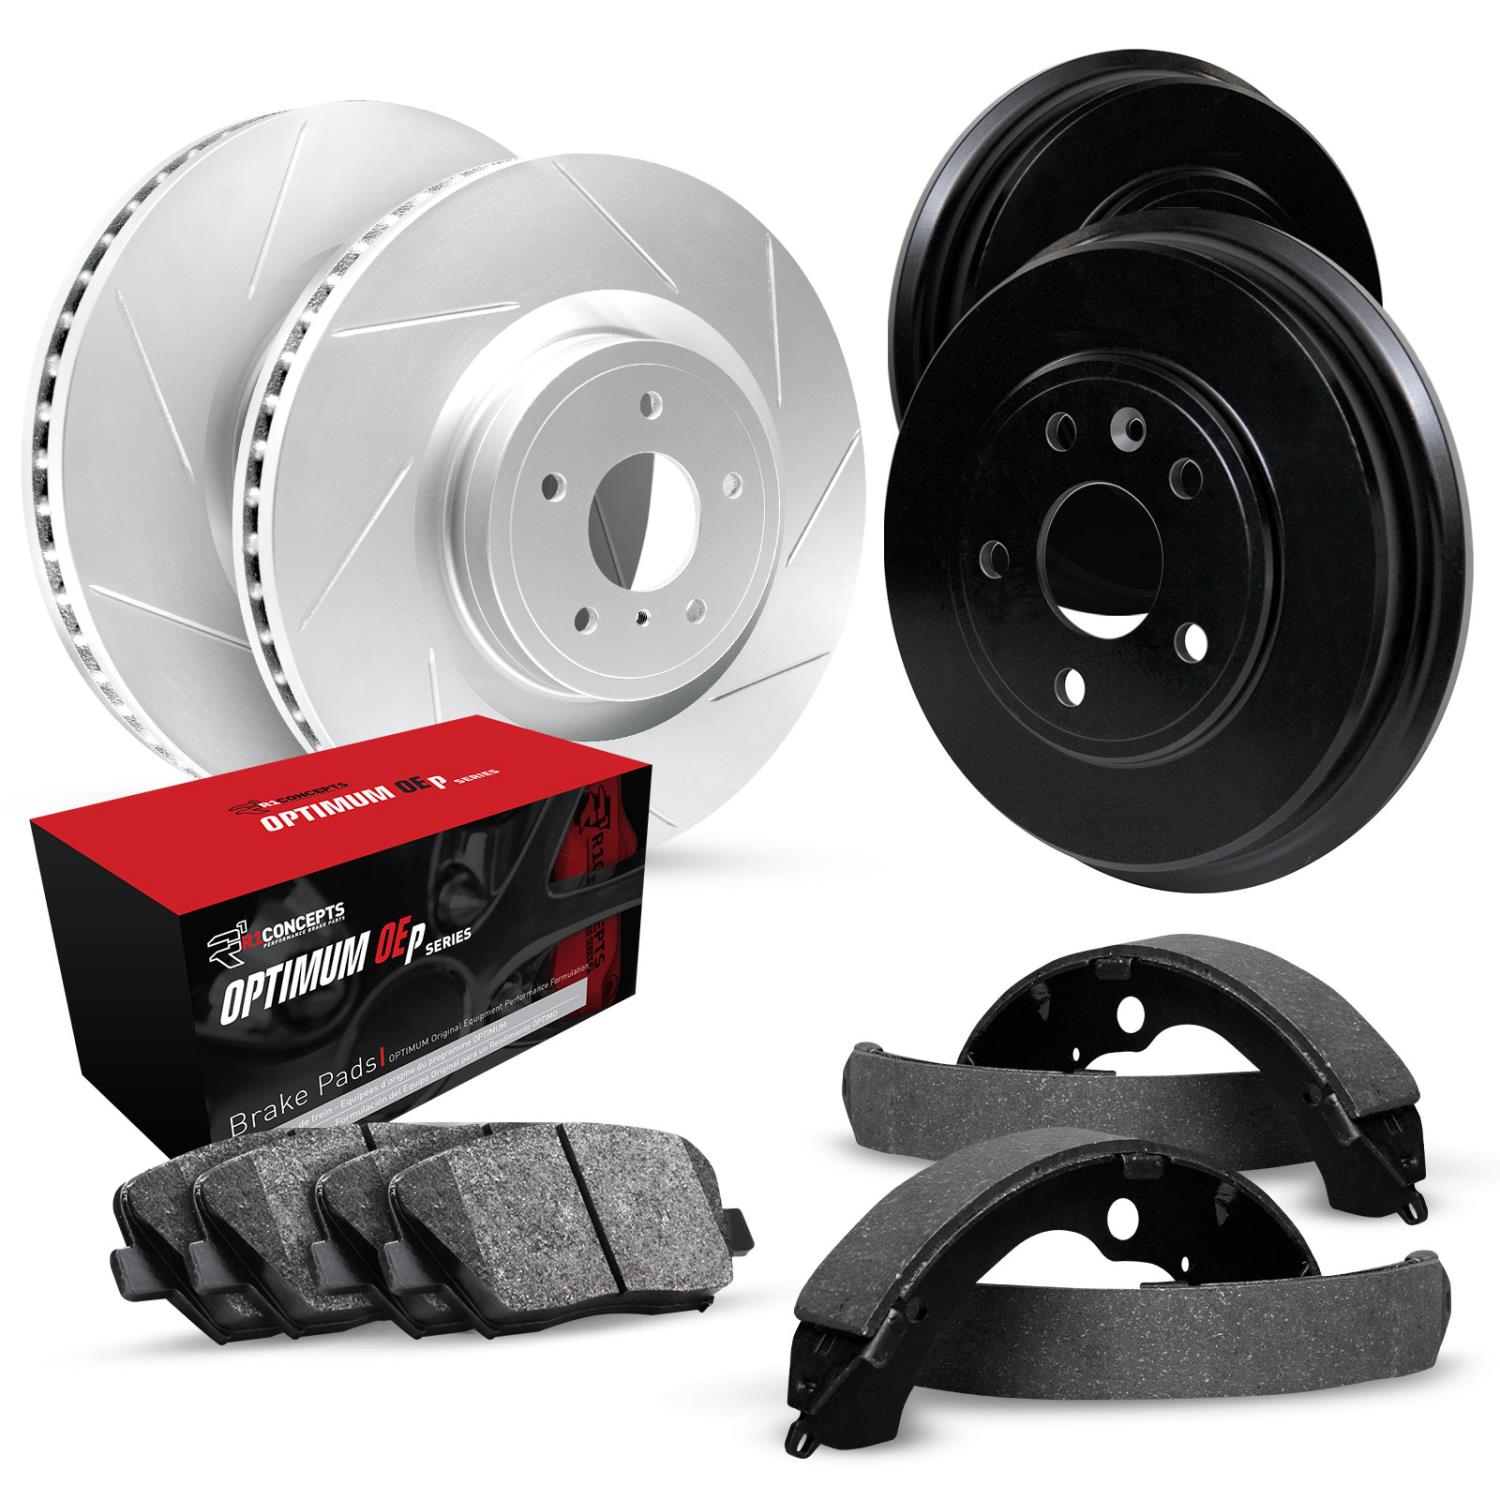 GEO-Carbon Slotted Brake Rotor & Drum Set w/Optimum OE Pads & Shoes, 1990-2002 GM, Position: Front & Rear